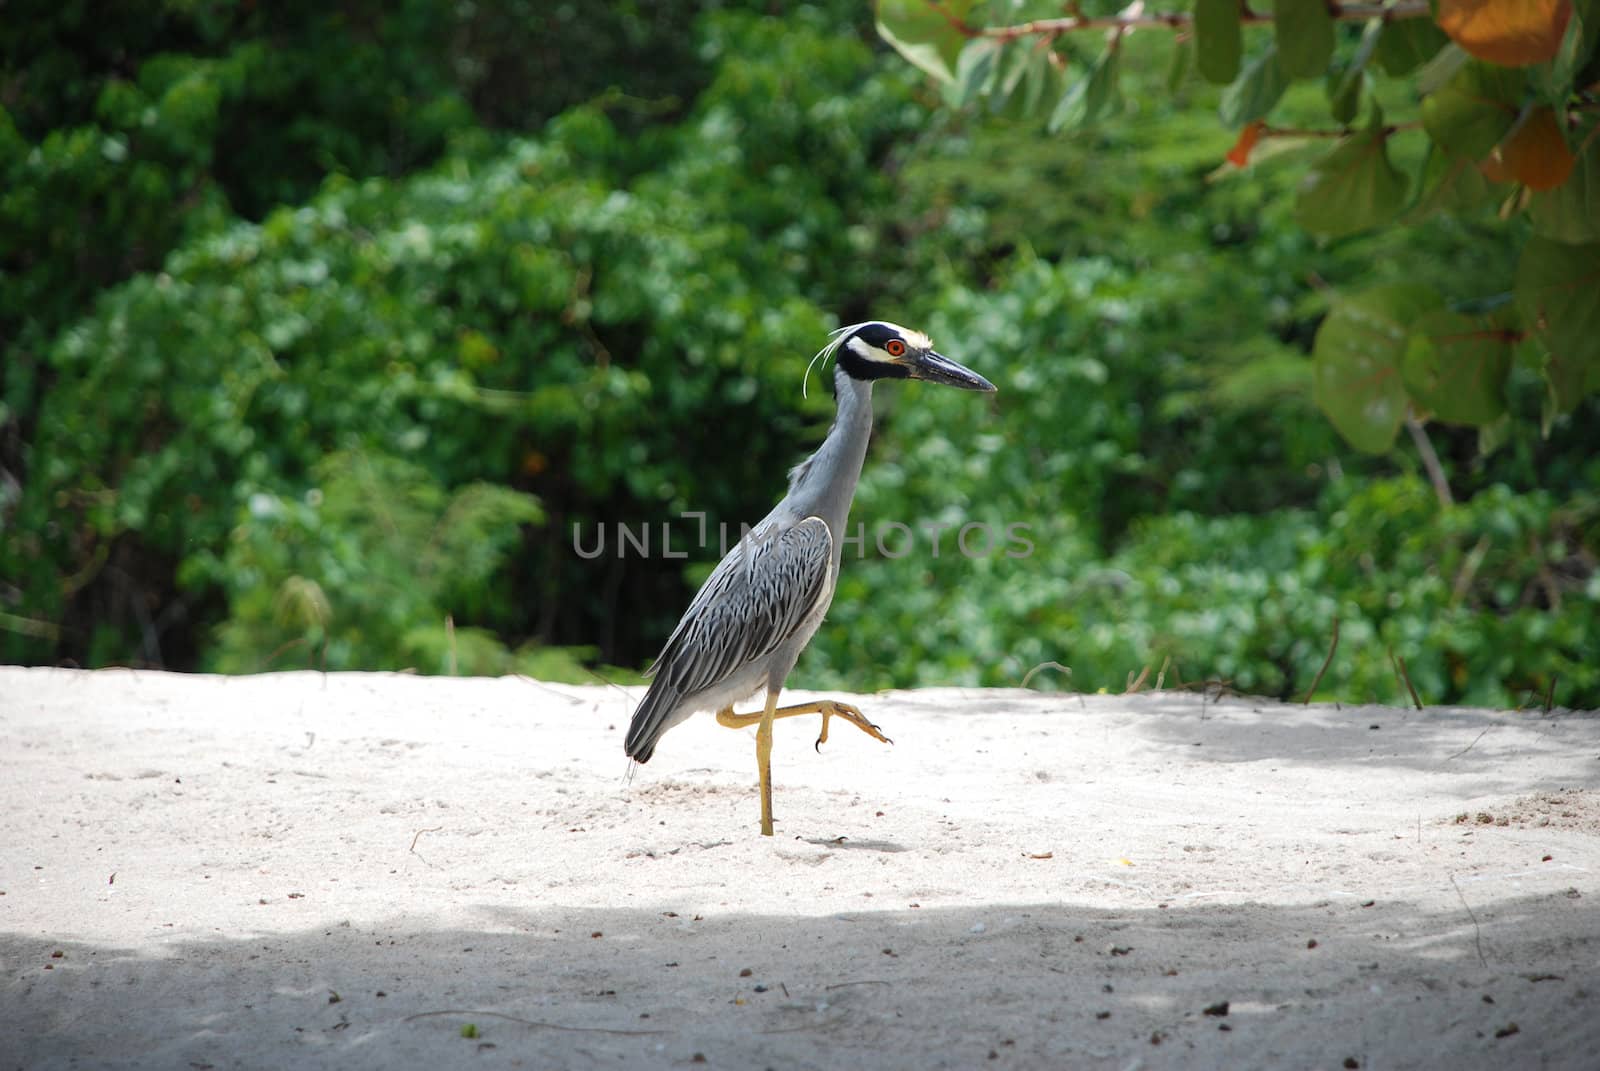 Yellow-crested night heron stalking along a white sand beach in the Caribbean